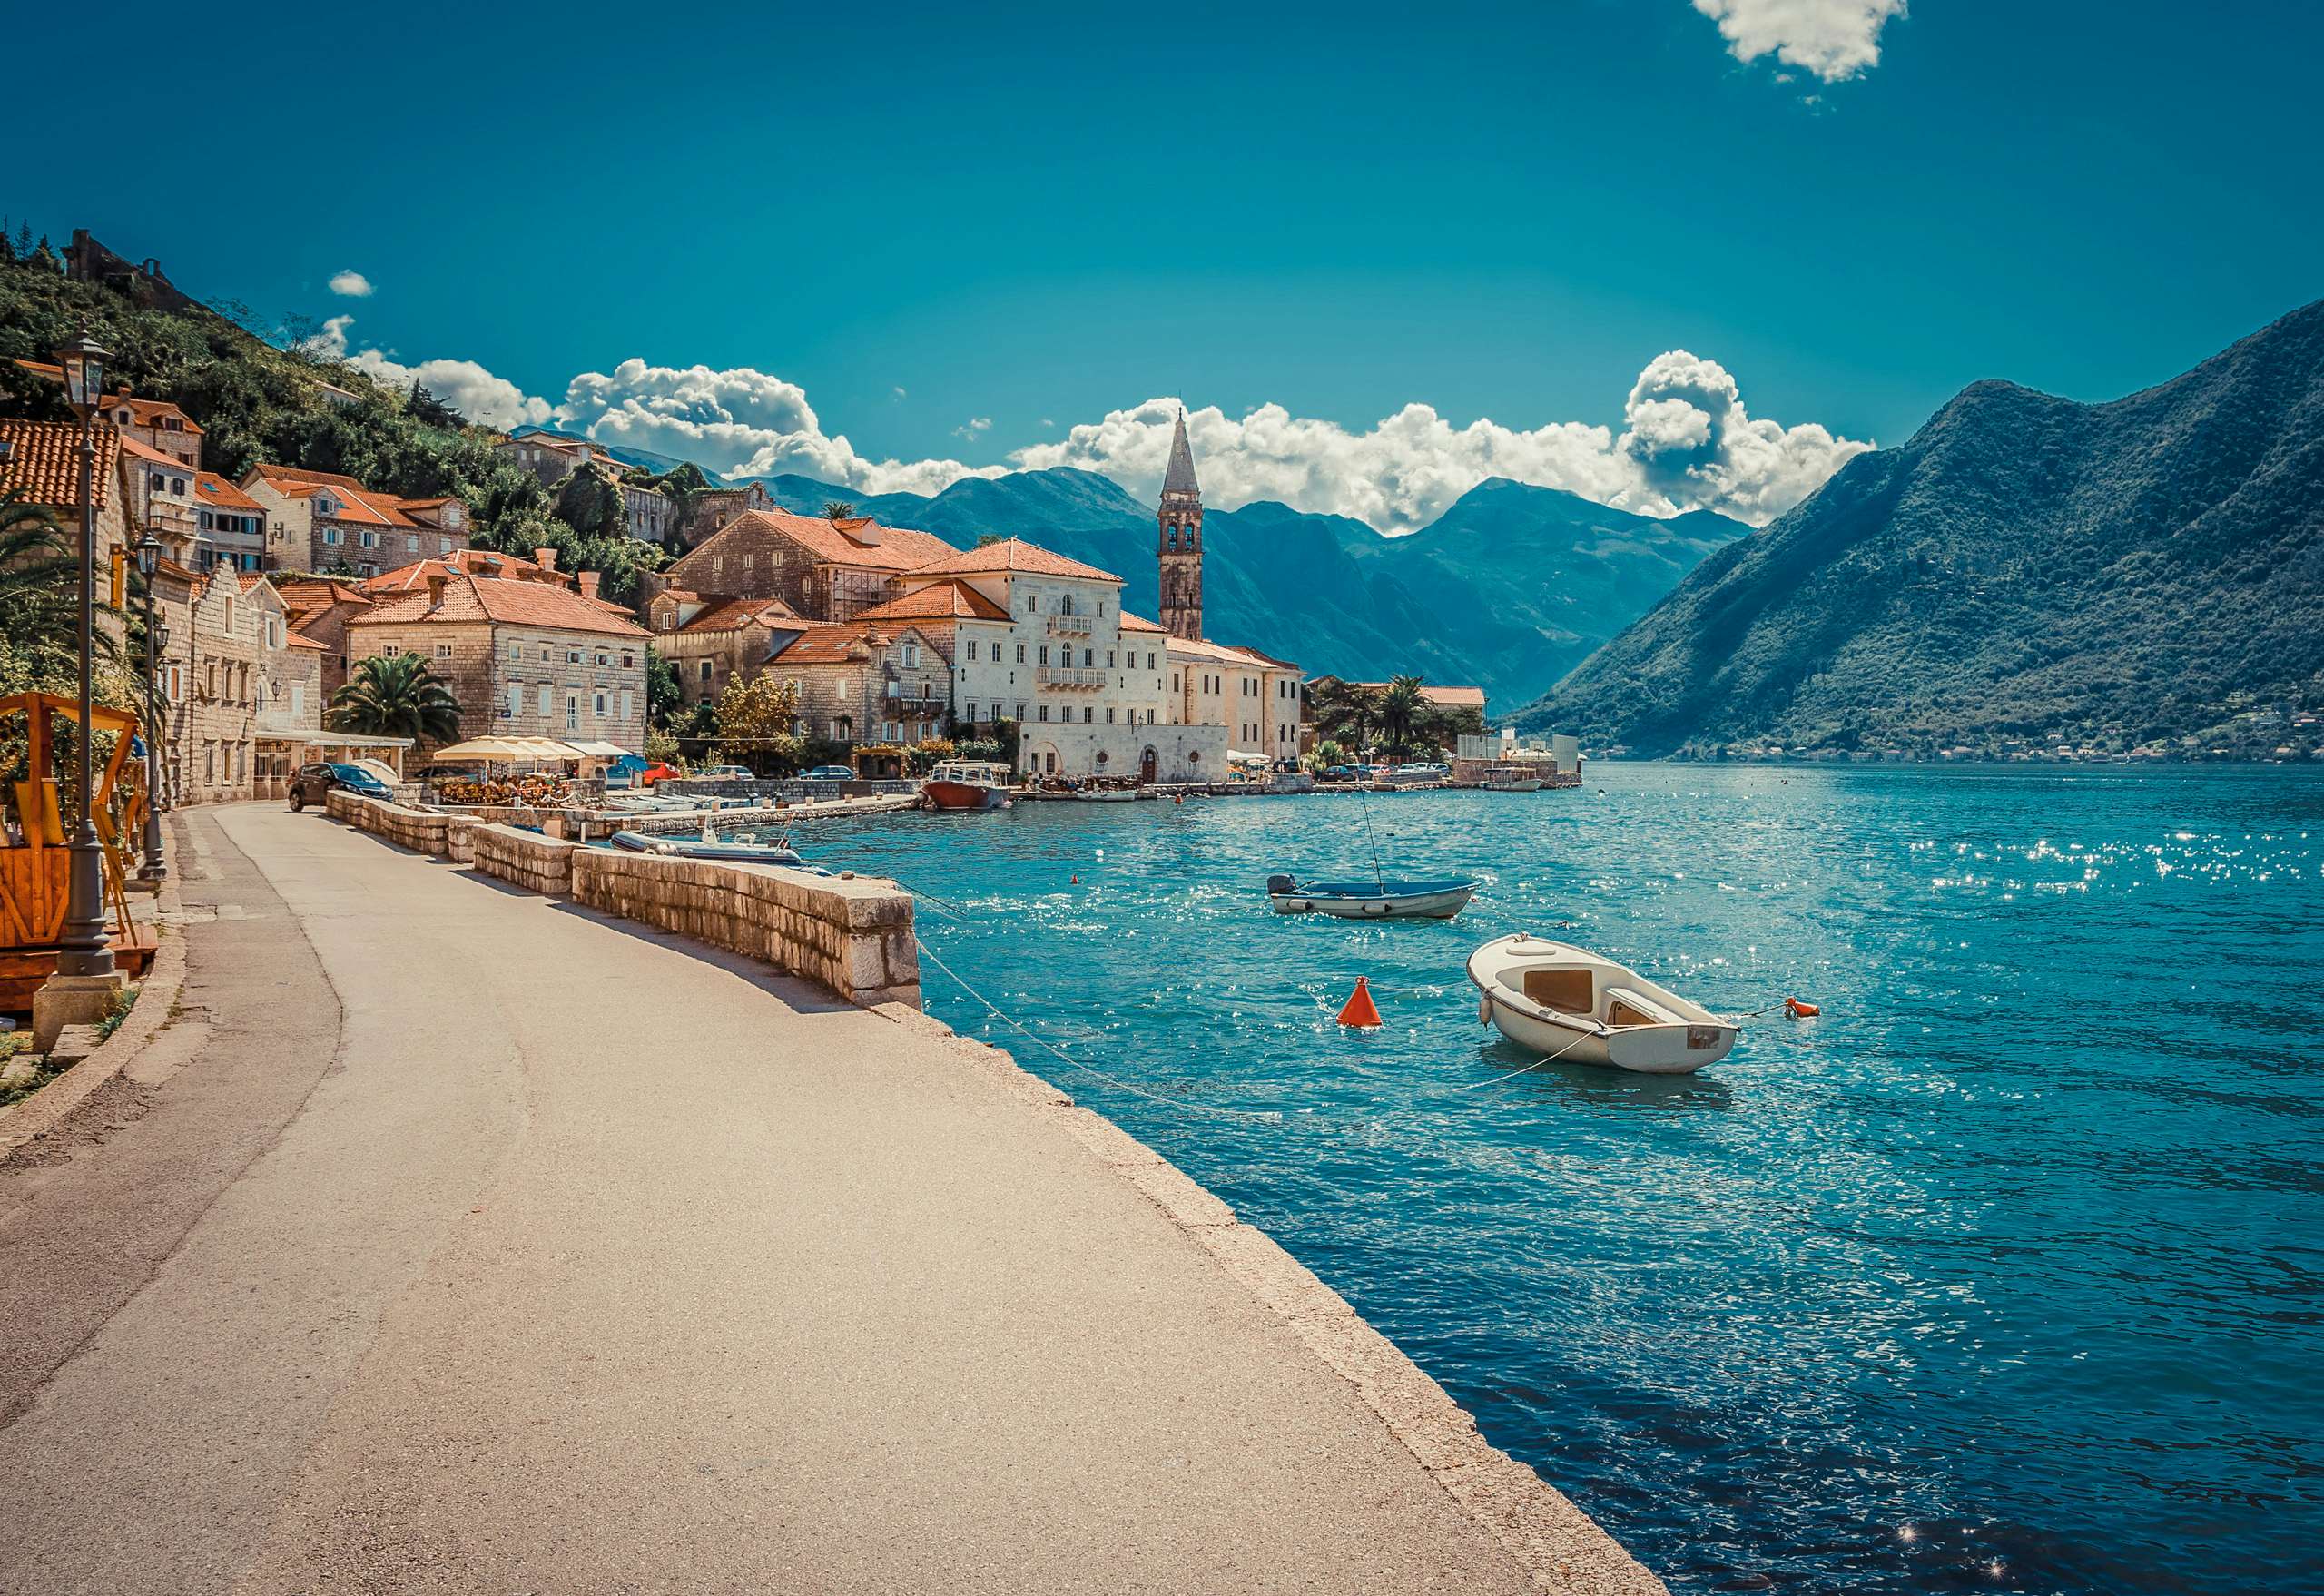 Pristine Montenegrin coastline with yachts and boats, a prime location for N&J yacht charter customers seeking relaxation and exploration.